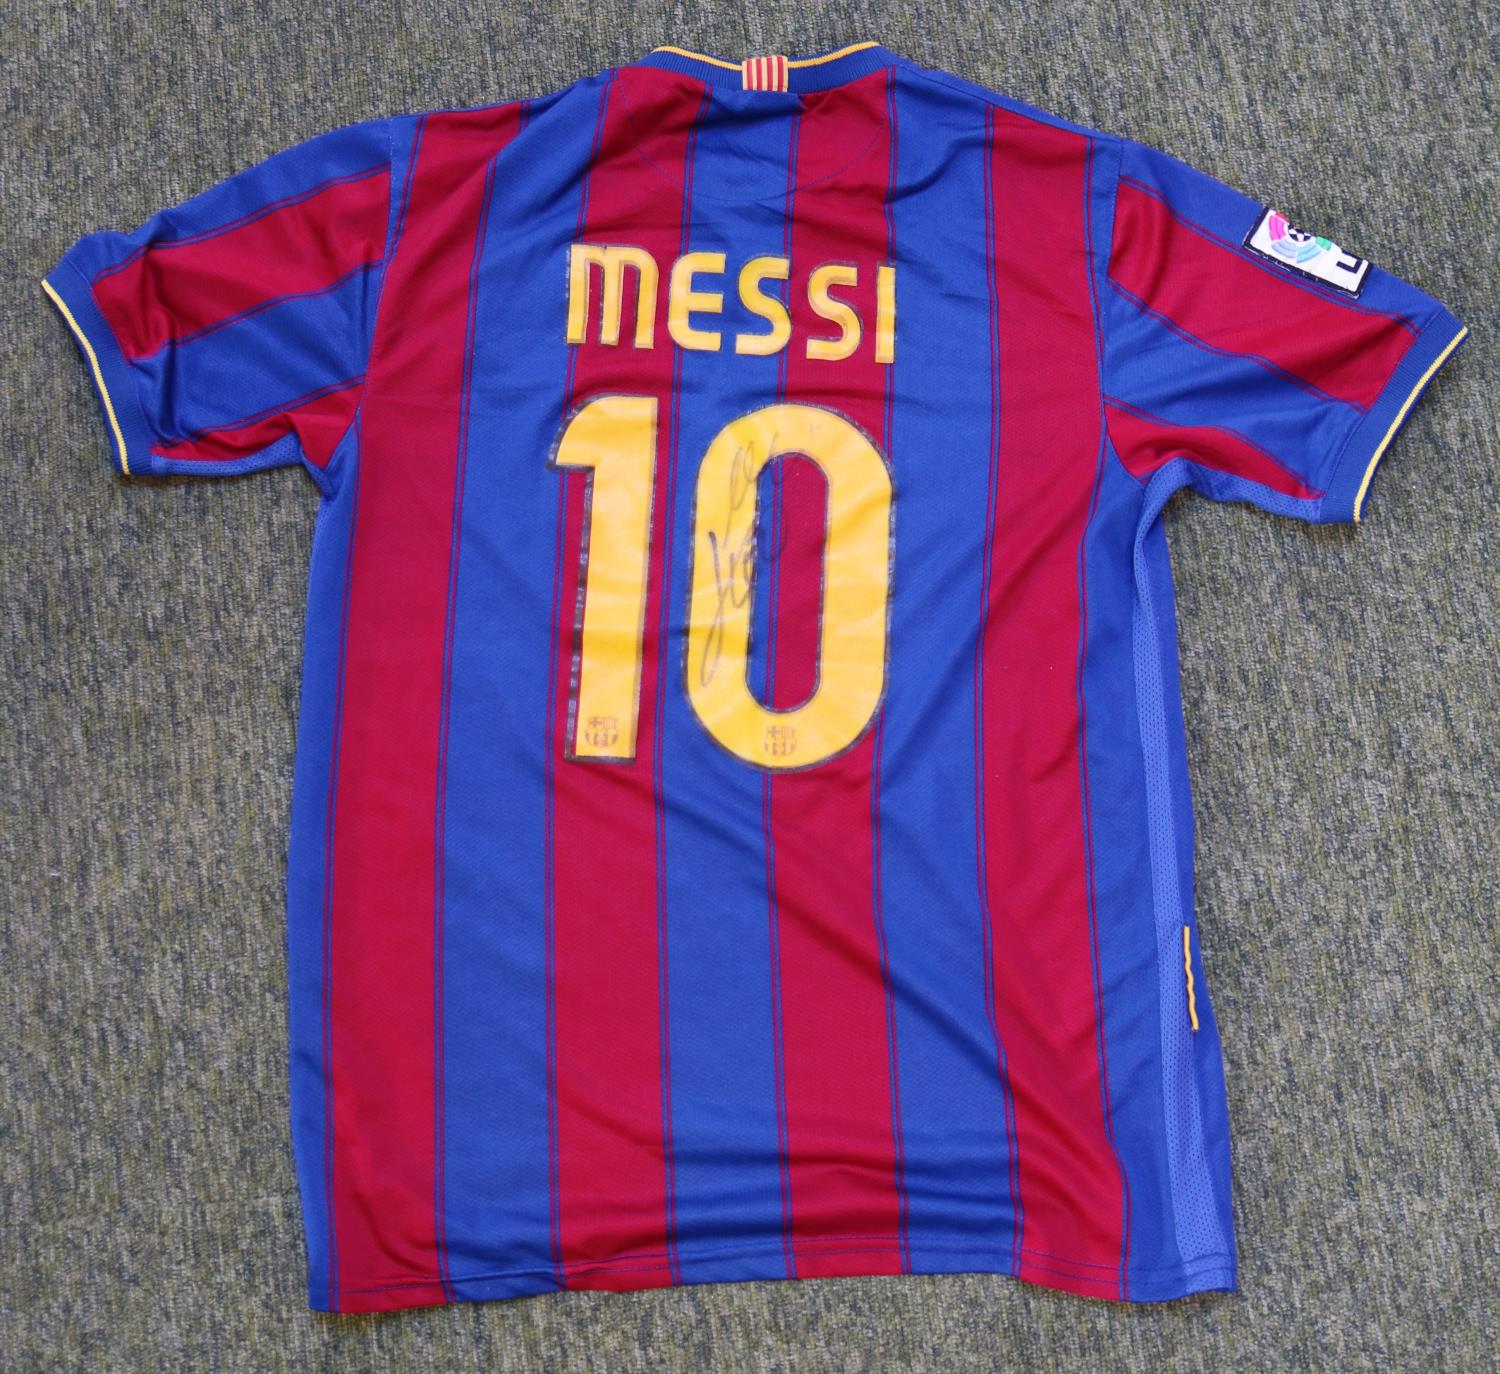 LIONEL MESSI 2009/2010 SIGNED BARCELONA #10 JERSEY The jersey is accompanied by a letter of - Image 7 of 10